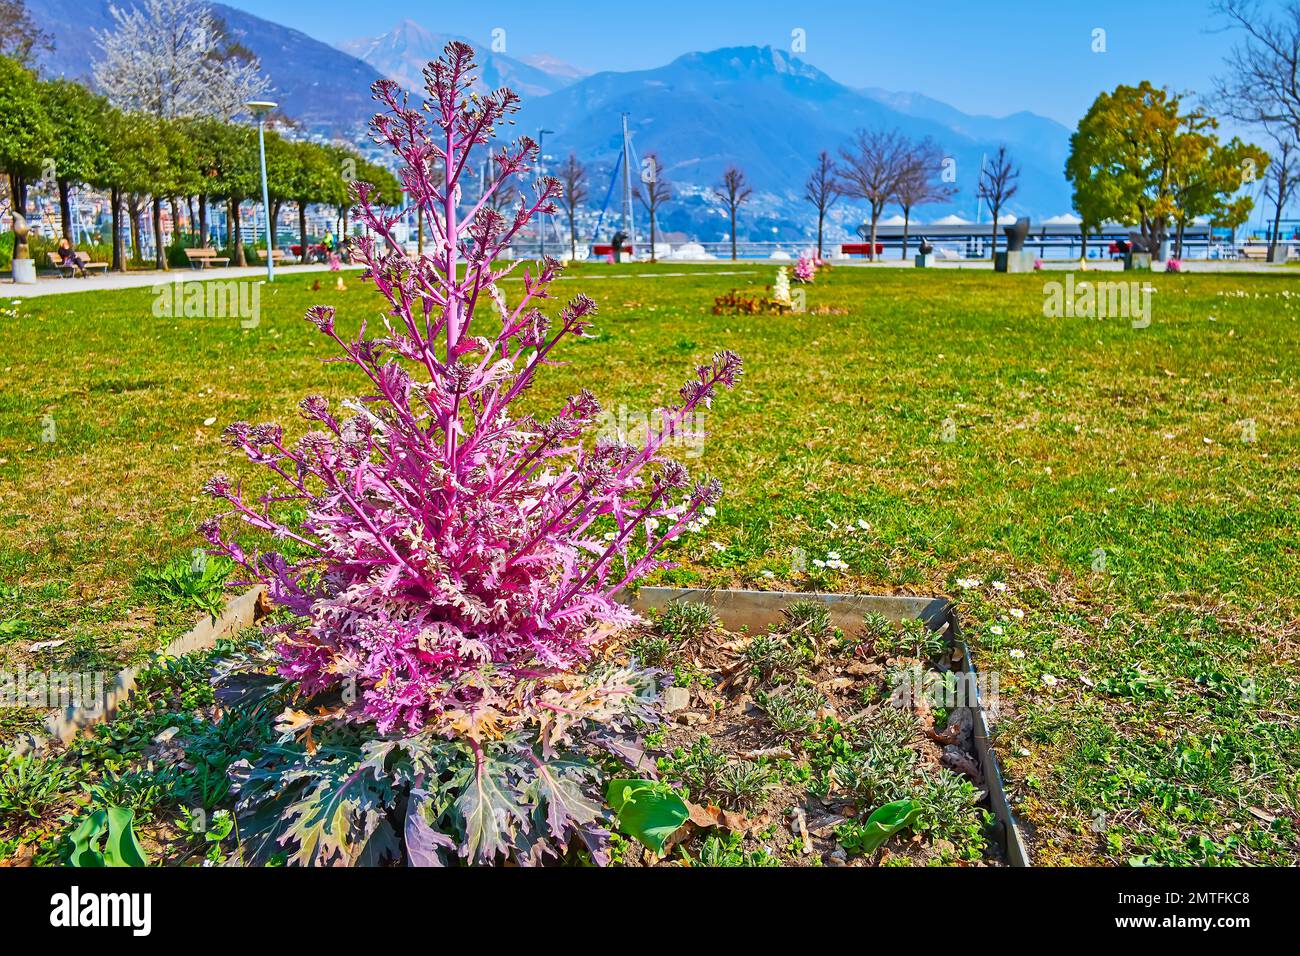 The green lawn of Giardini Jean Arp garden with ornamental kale against the green trees and hazy Alps, Locarno, Switzerland Stock Photo